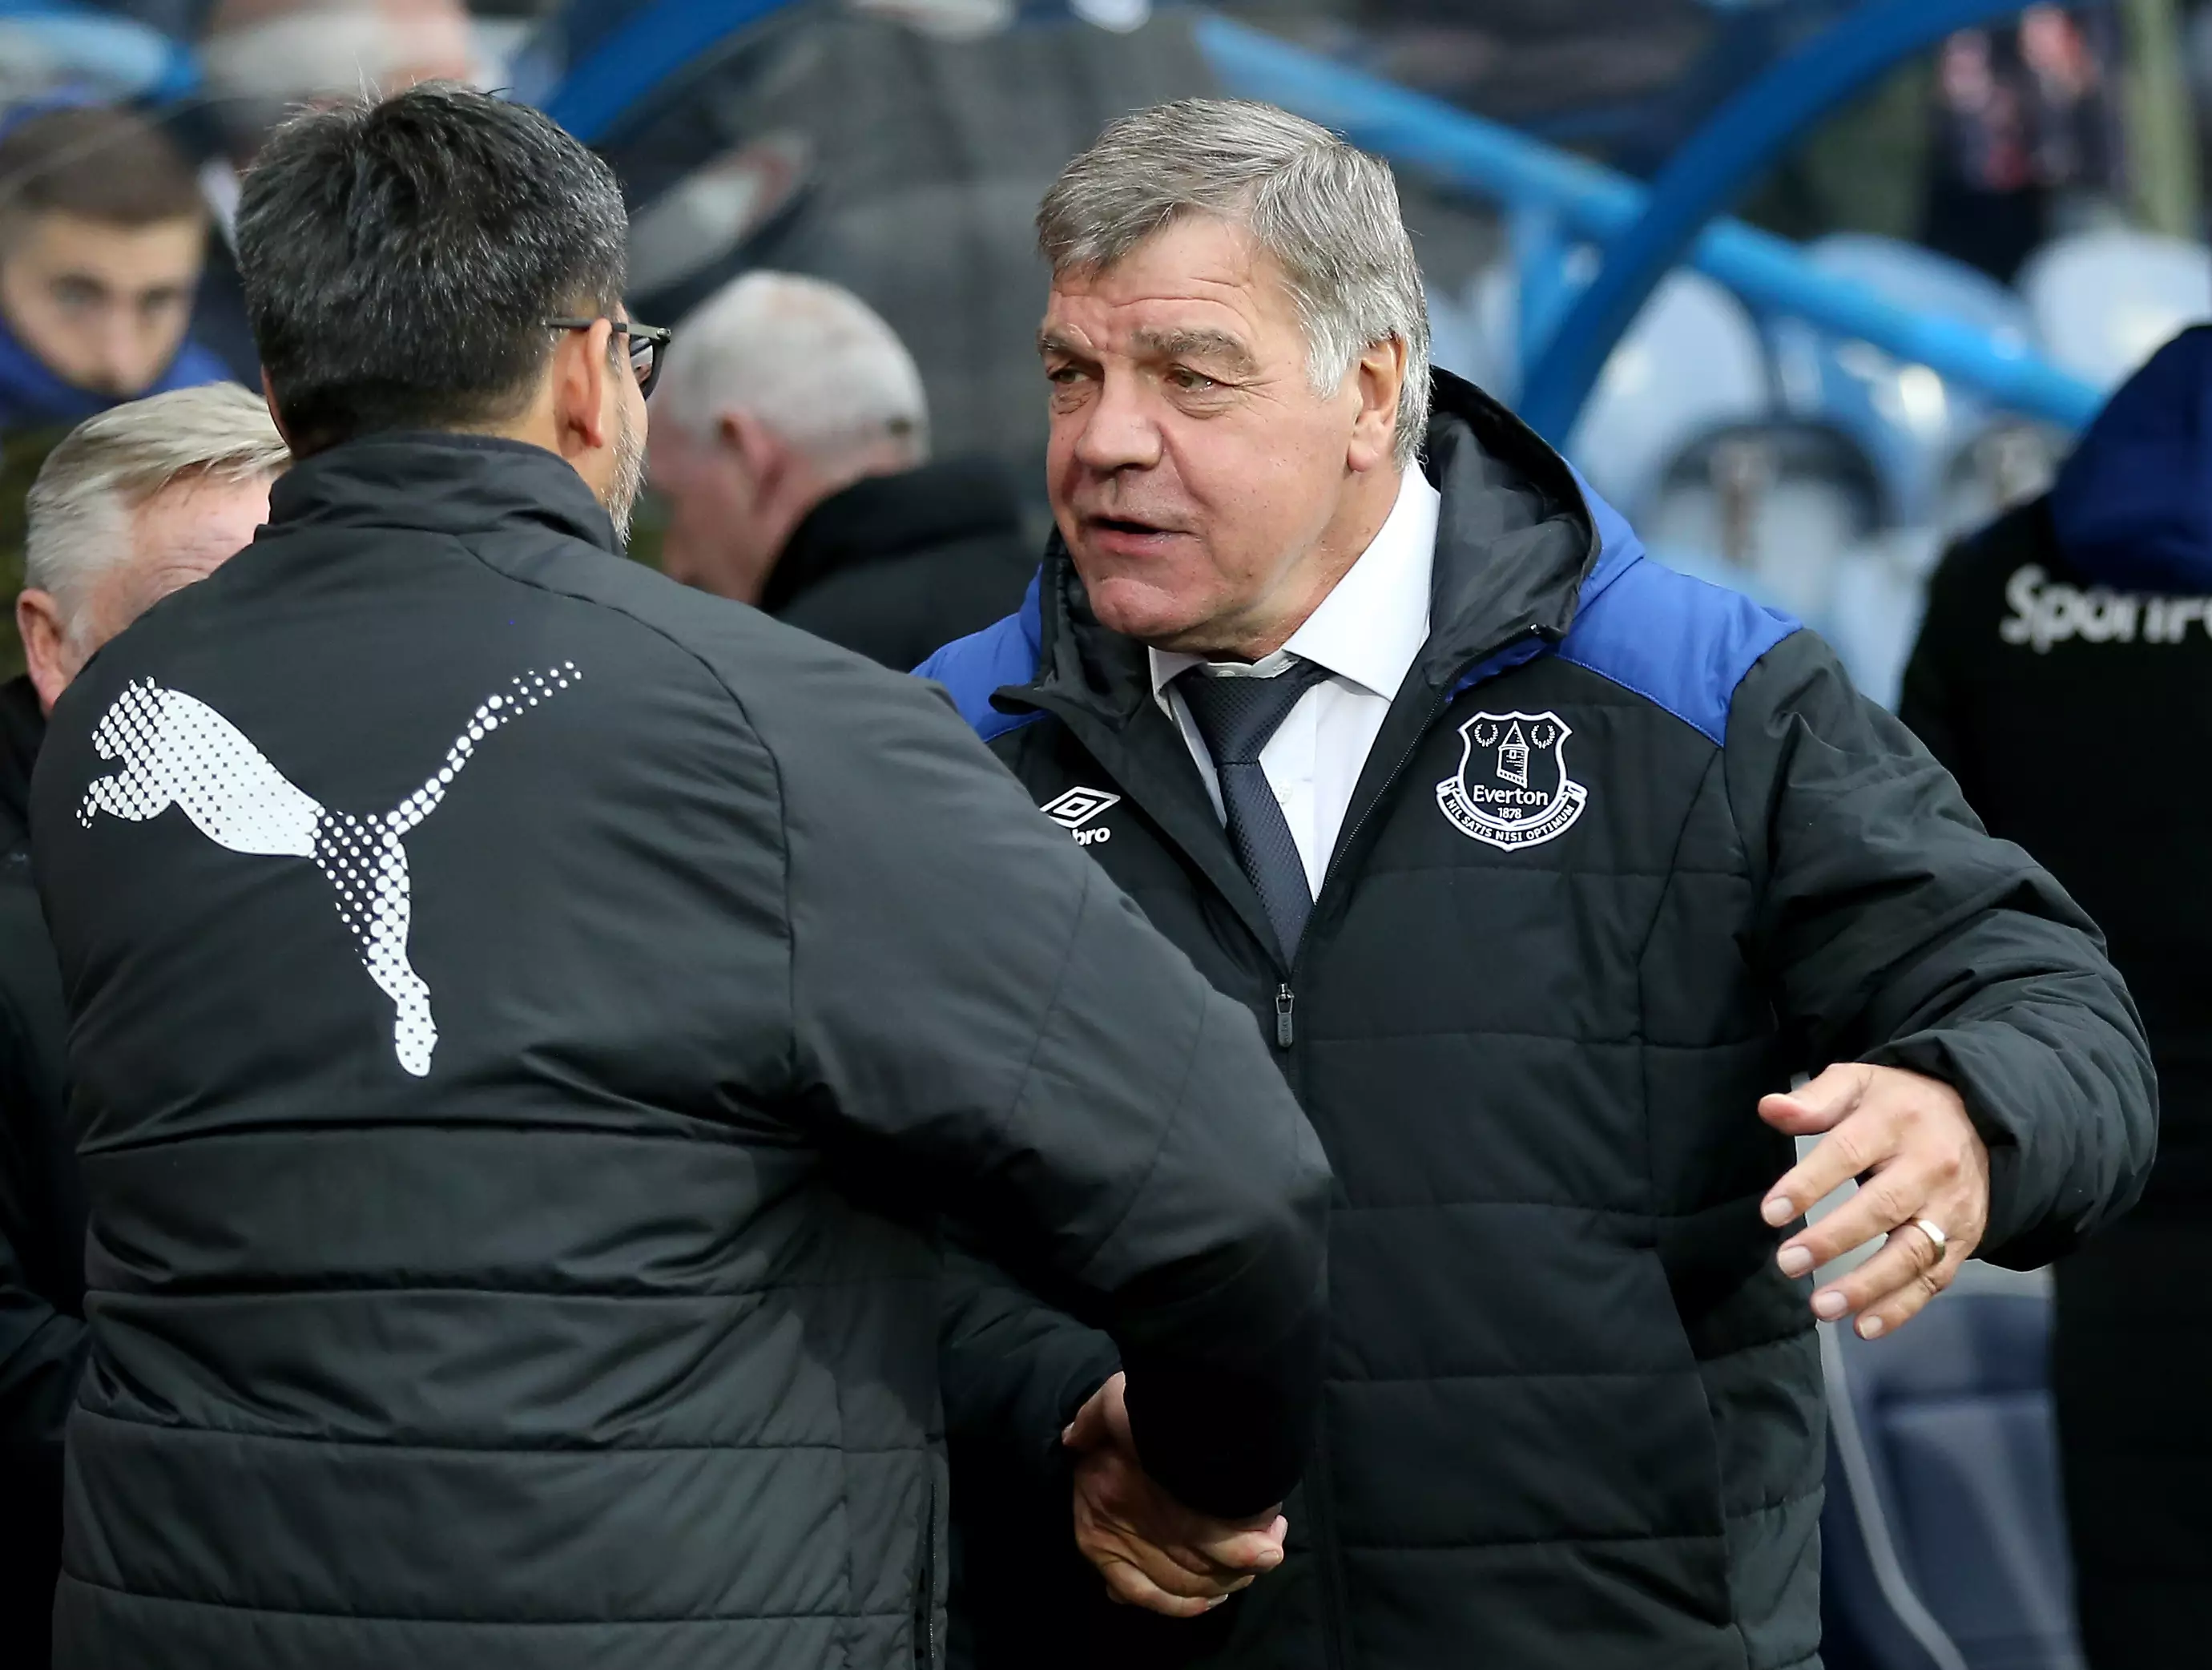 Big Sam hasn't managed since working for Everton. Image: PA Images